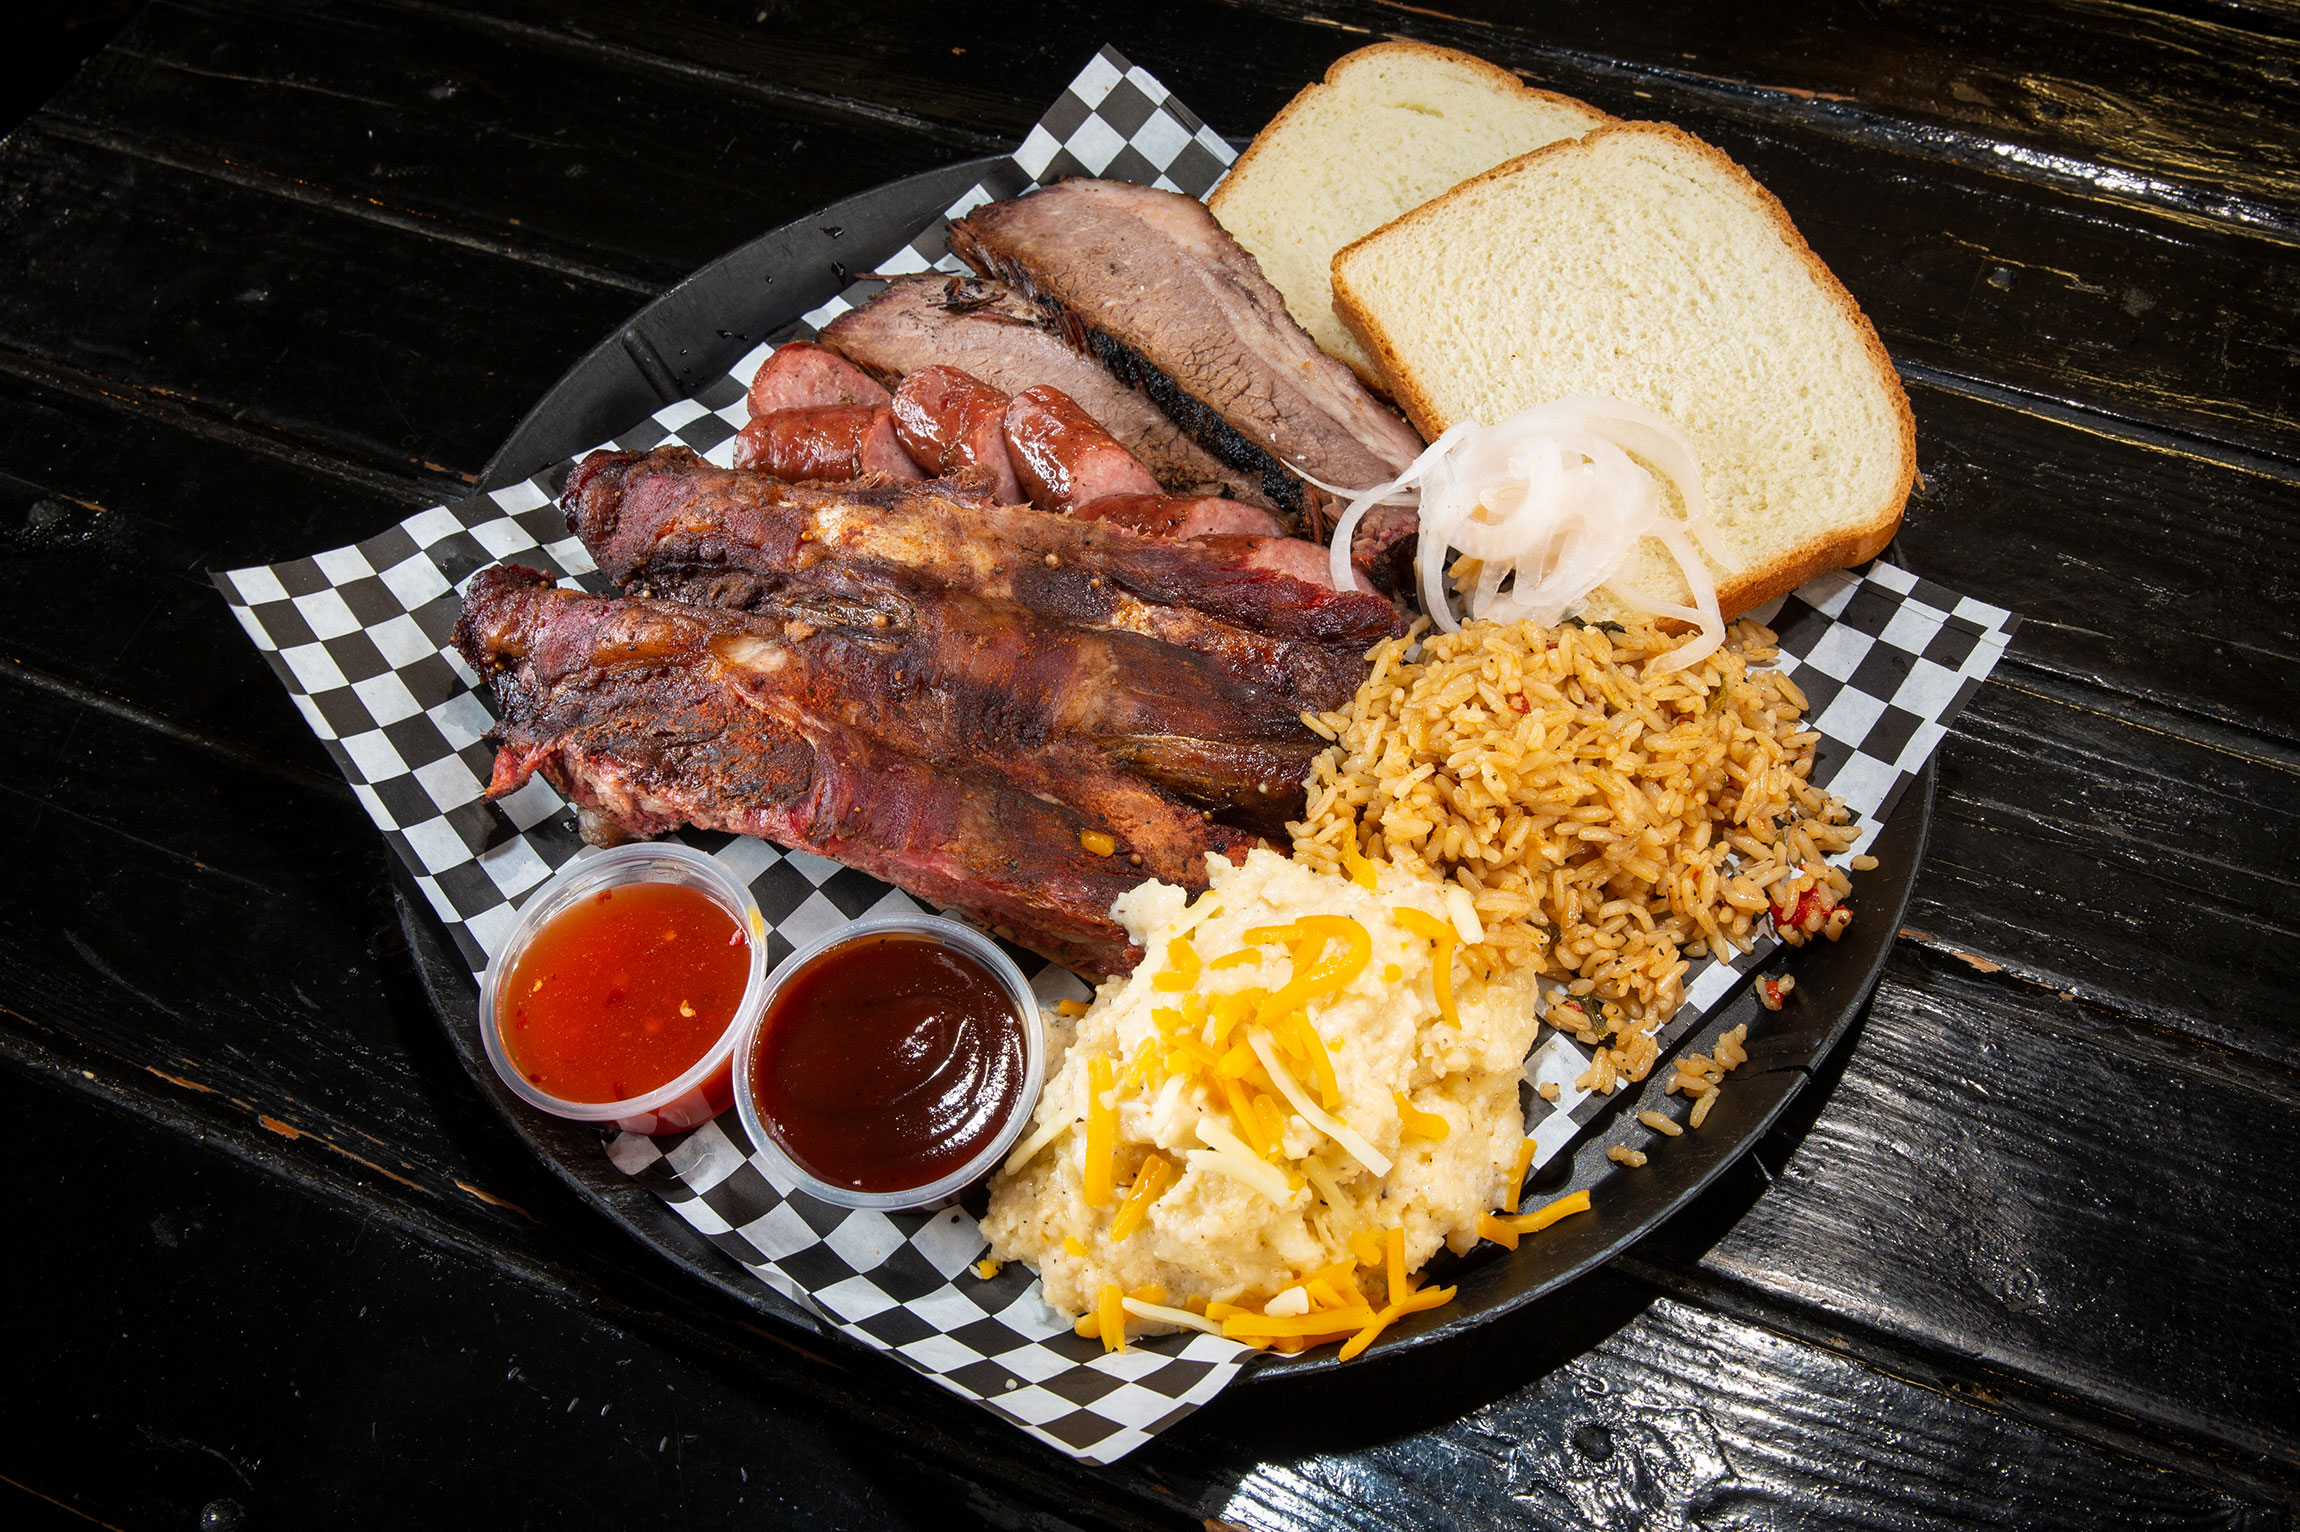 Naked girls brisket Naked City Pizza Unleashes A Full Menu Of Smoked Meats Las Vegas Weekly